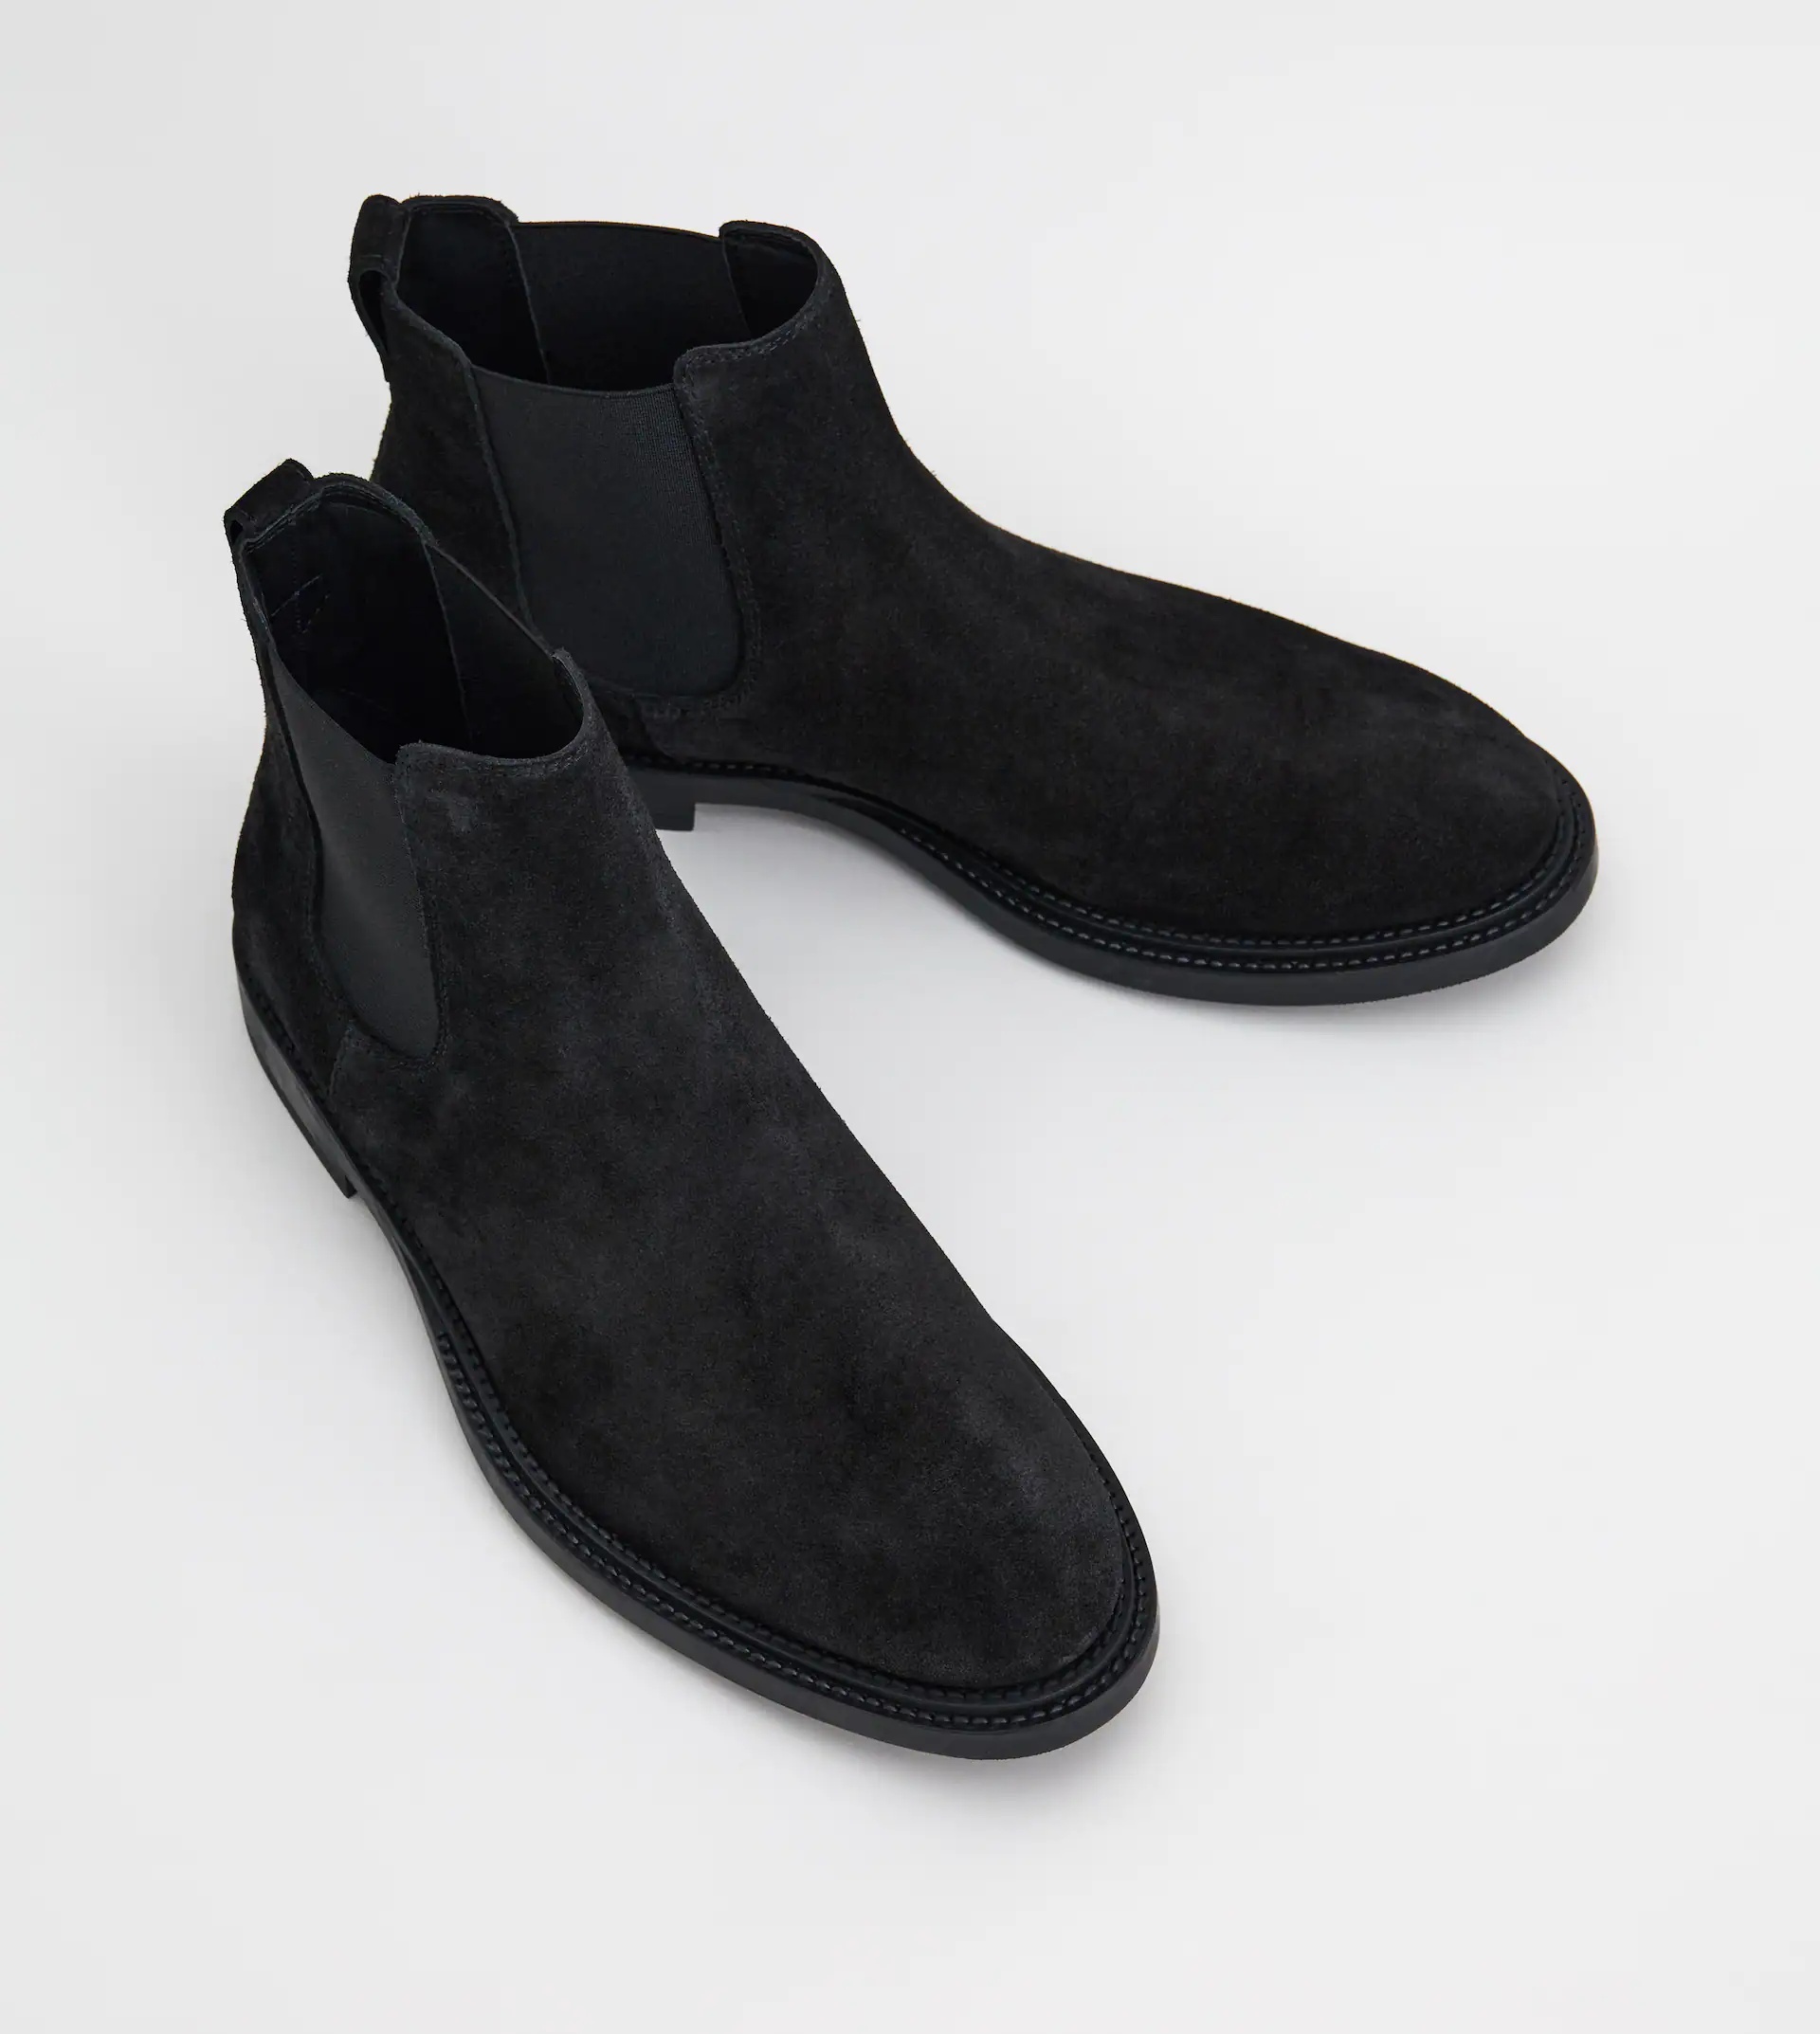 ANKLE BOOTS IN SUEDE - BLACK - 2